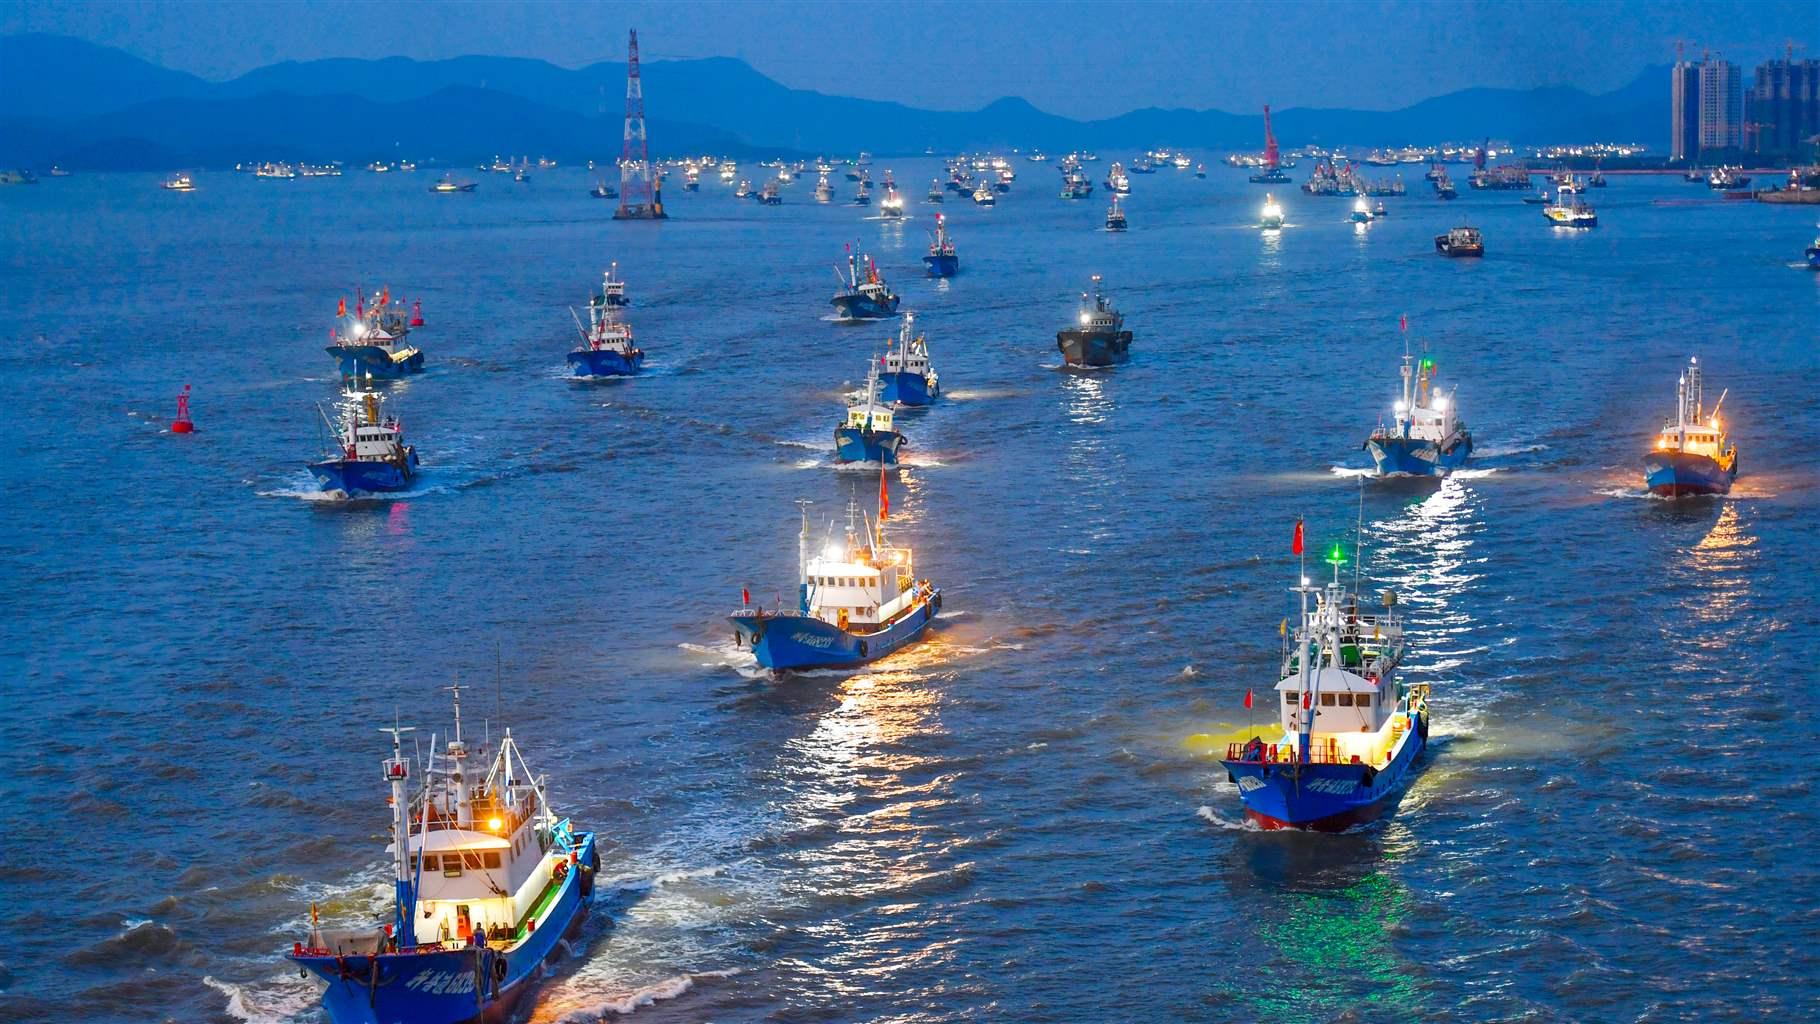 Fishing boats set sail in the morning to East China Sea for fishing on September 17, 2021 in Zhoushan, Zhejiang Province of China.